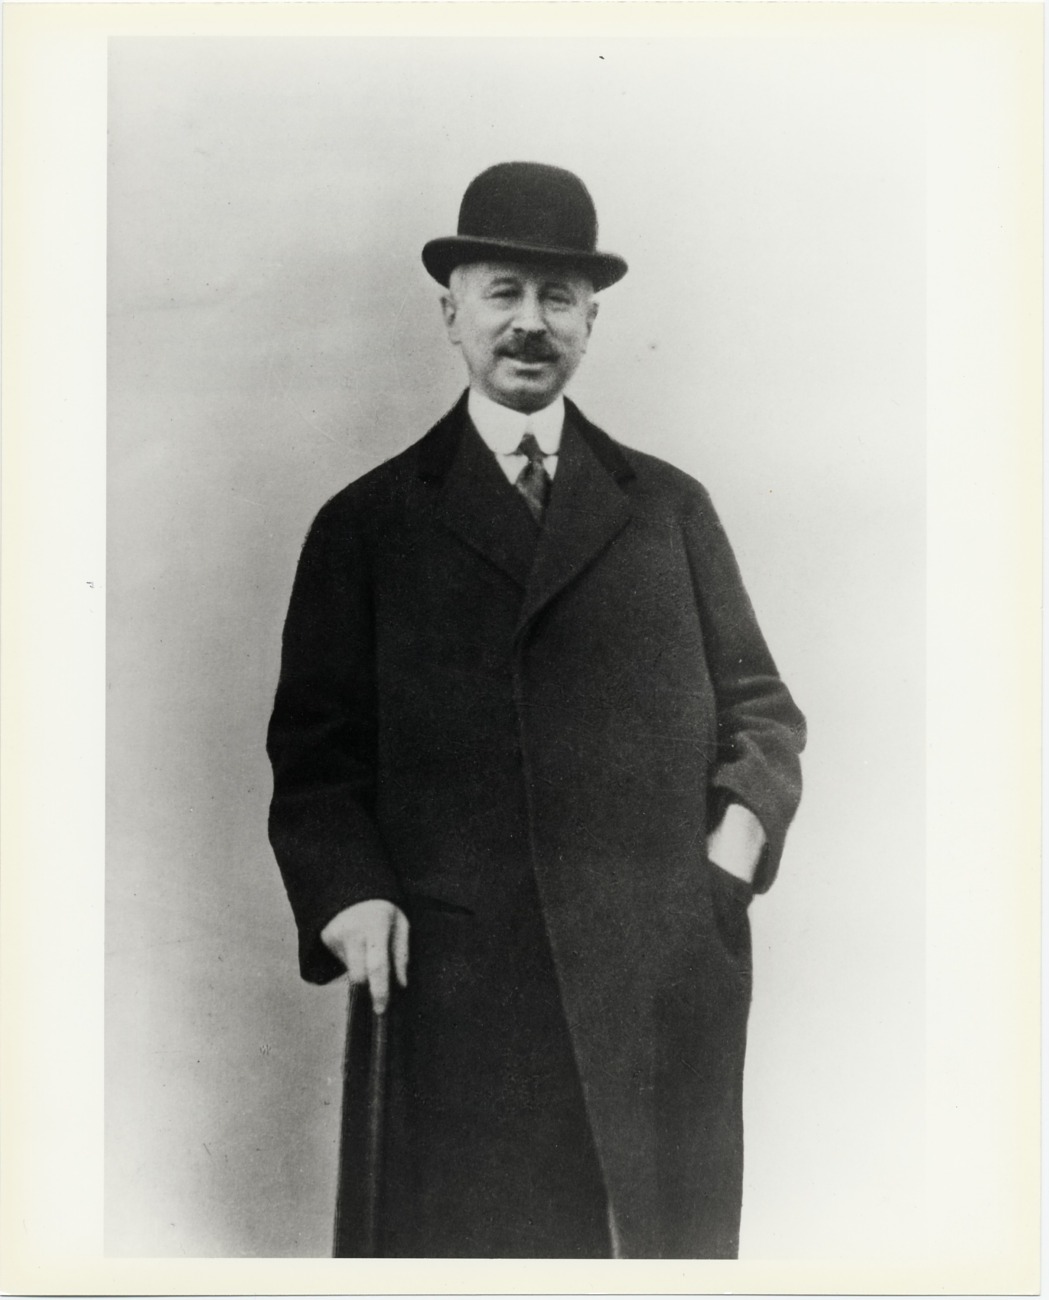 Jacques Seligmann (1858-1923), photographie non datée. Source : Archives of American Art, Smithsonian Institution.